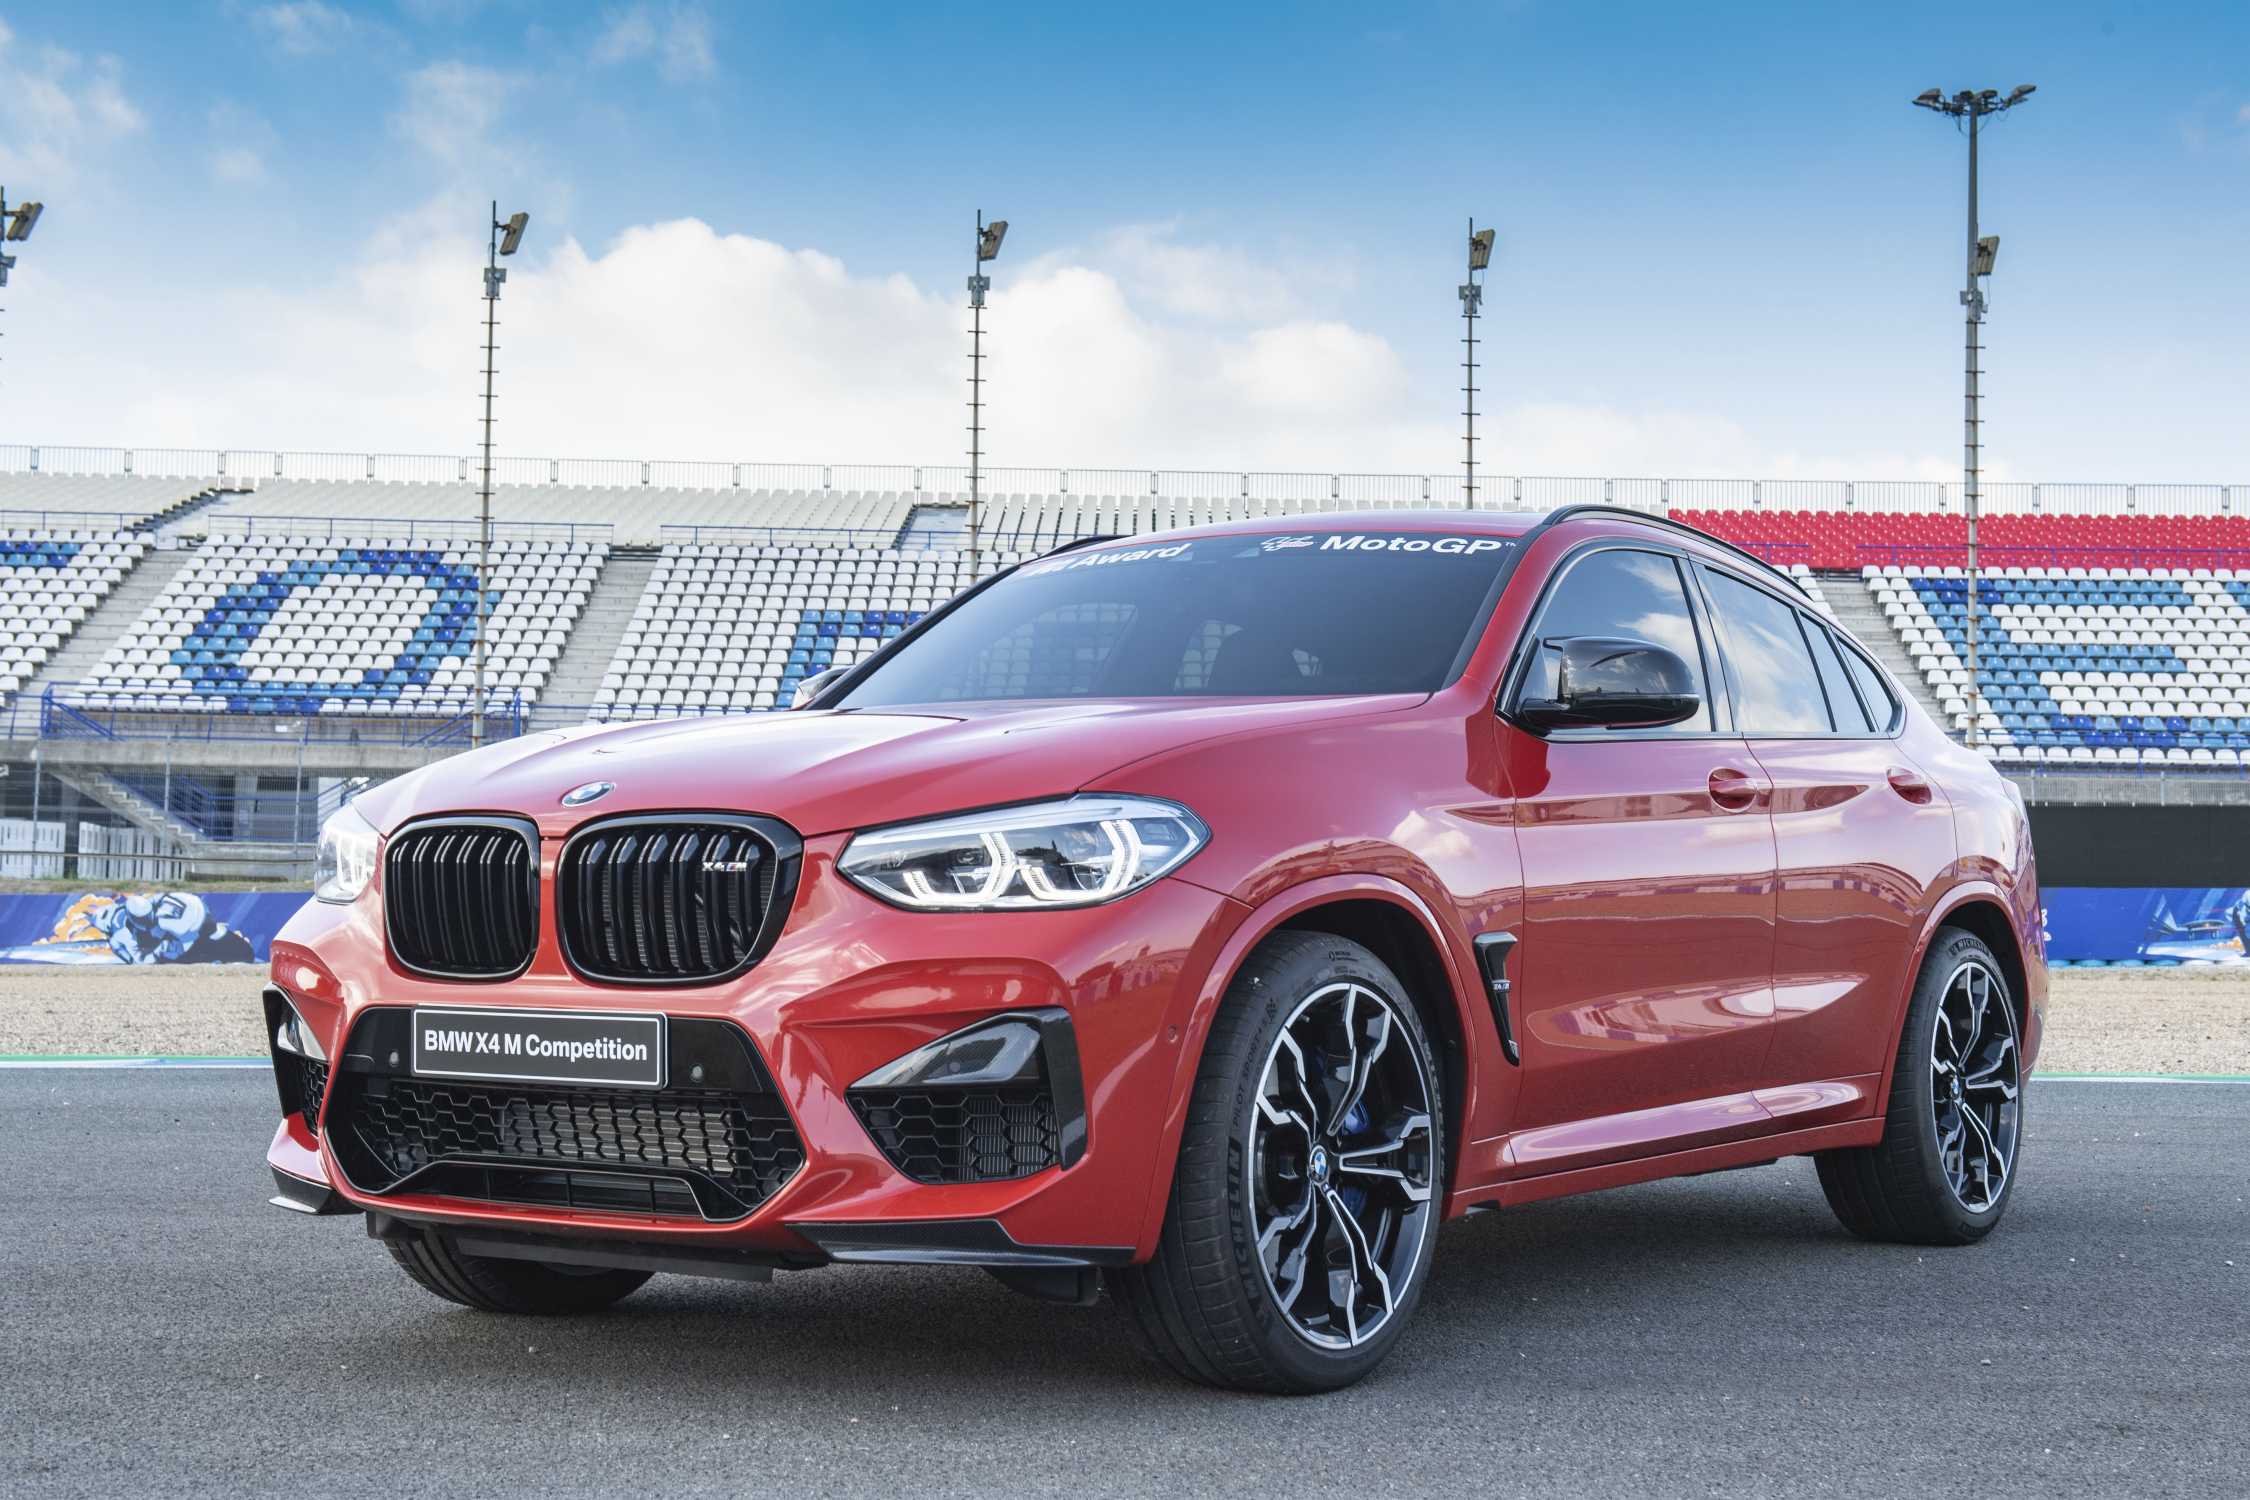 Bmw M Power For The Fastest Qualifier The New Bmw X4 M Competition Is The Motogptm Bmw M Award Winner S Car In 19